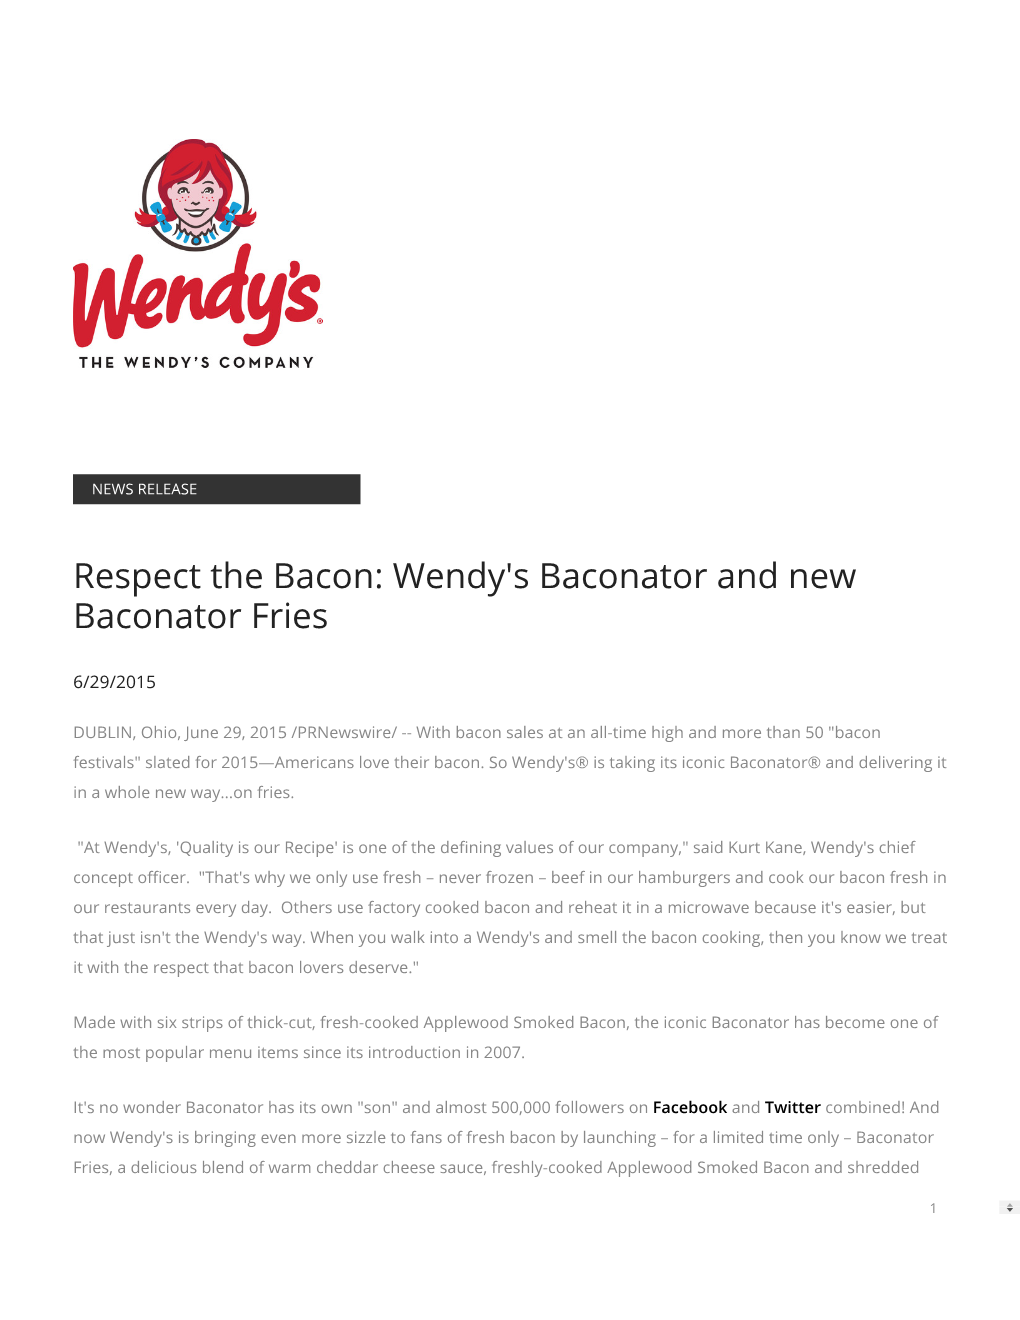 Respect the Bacon: Wendy's Baconator and New Baconator Fries